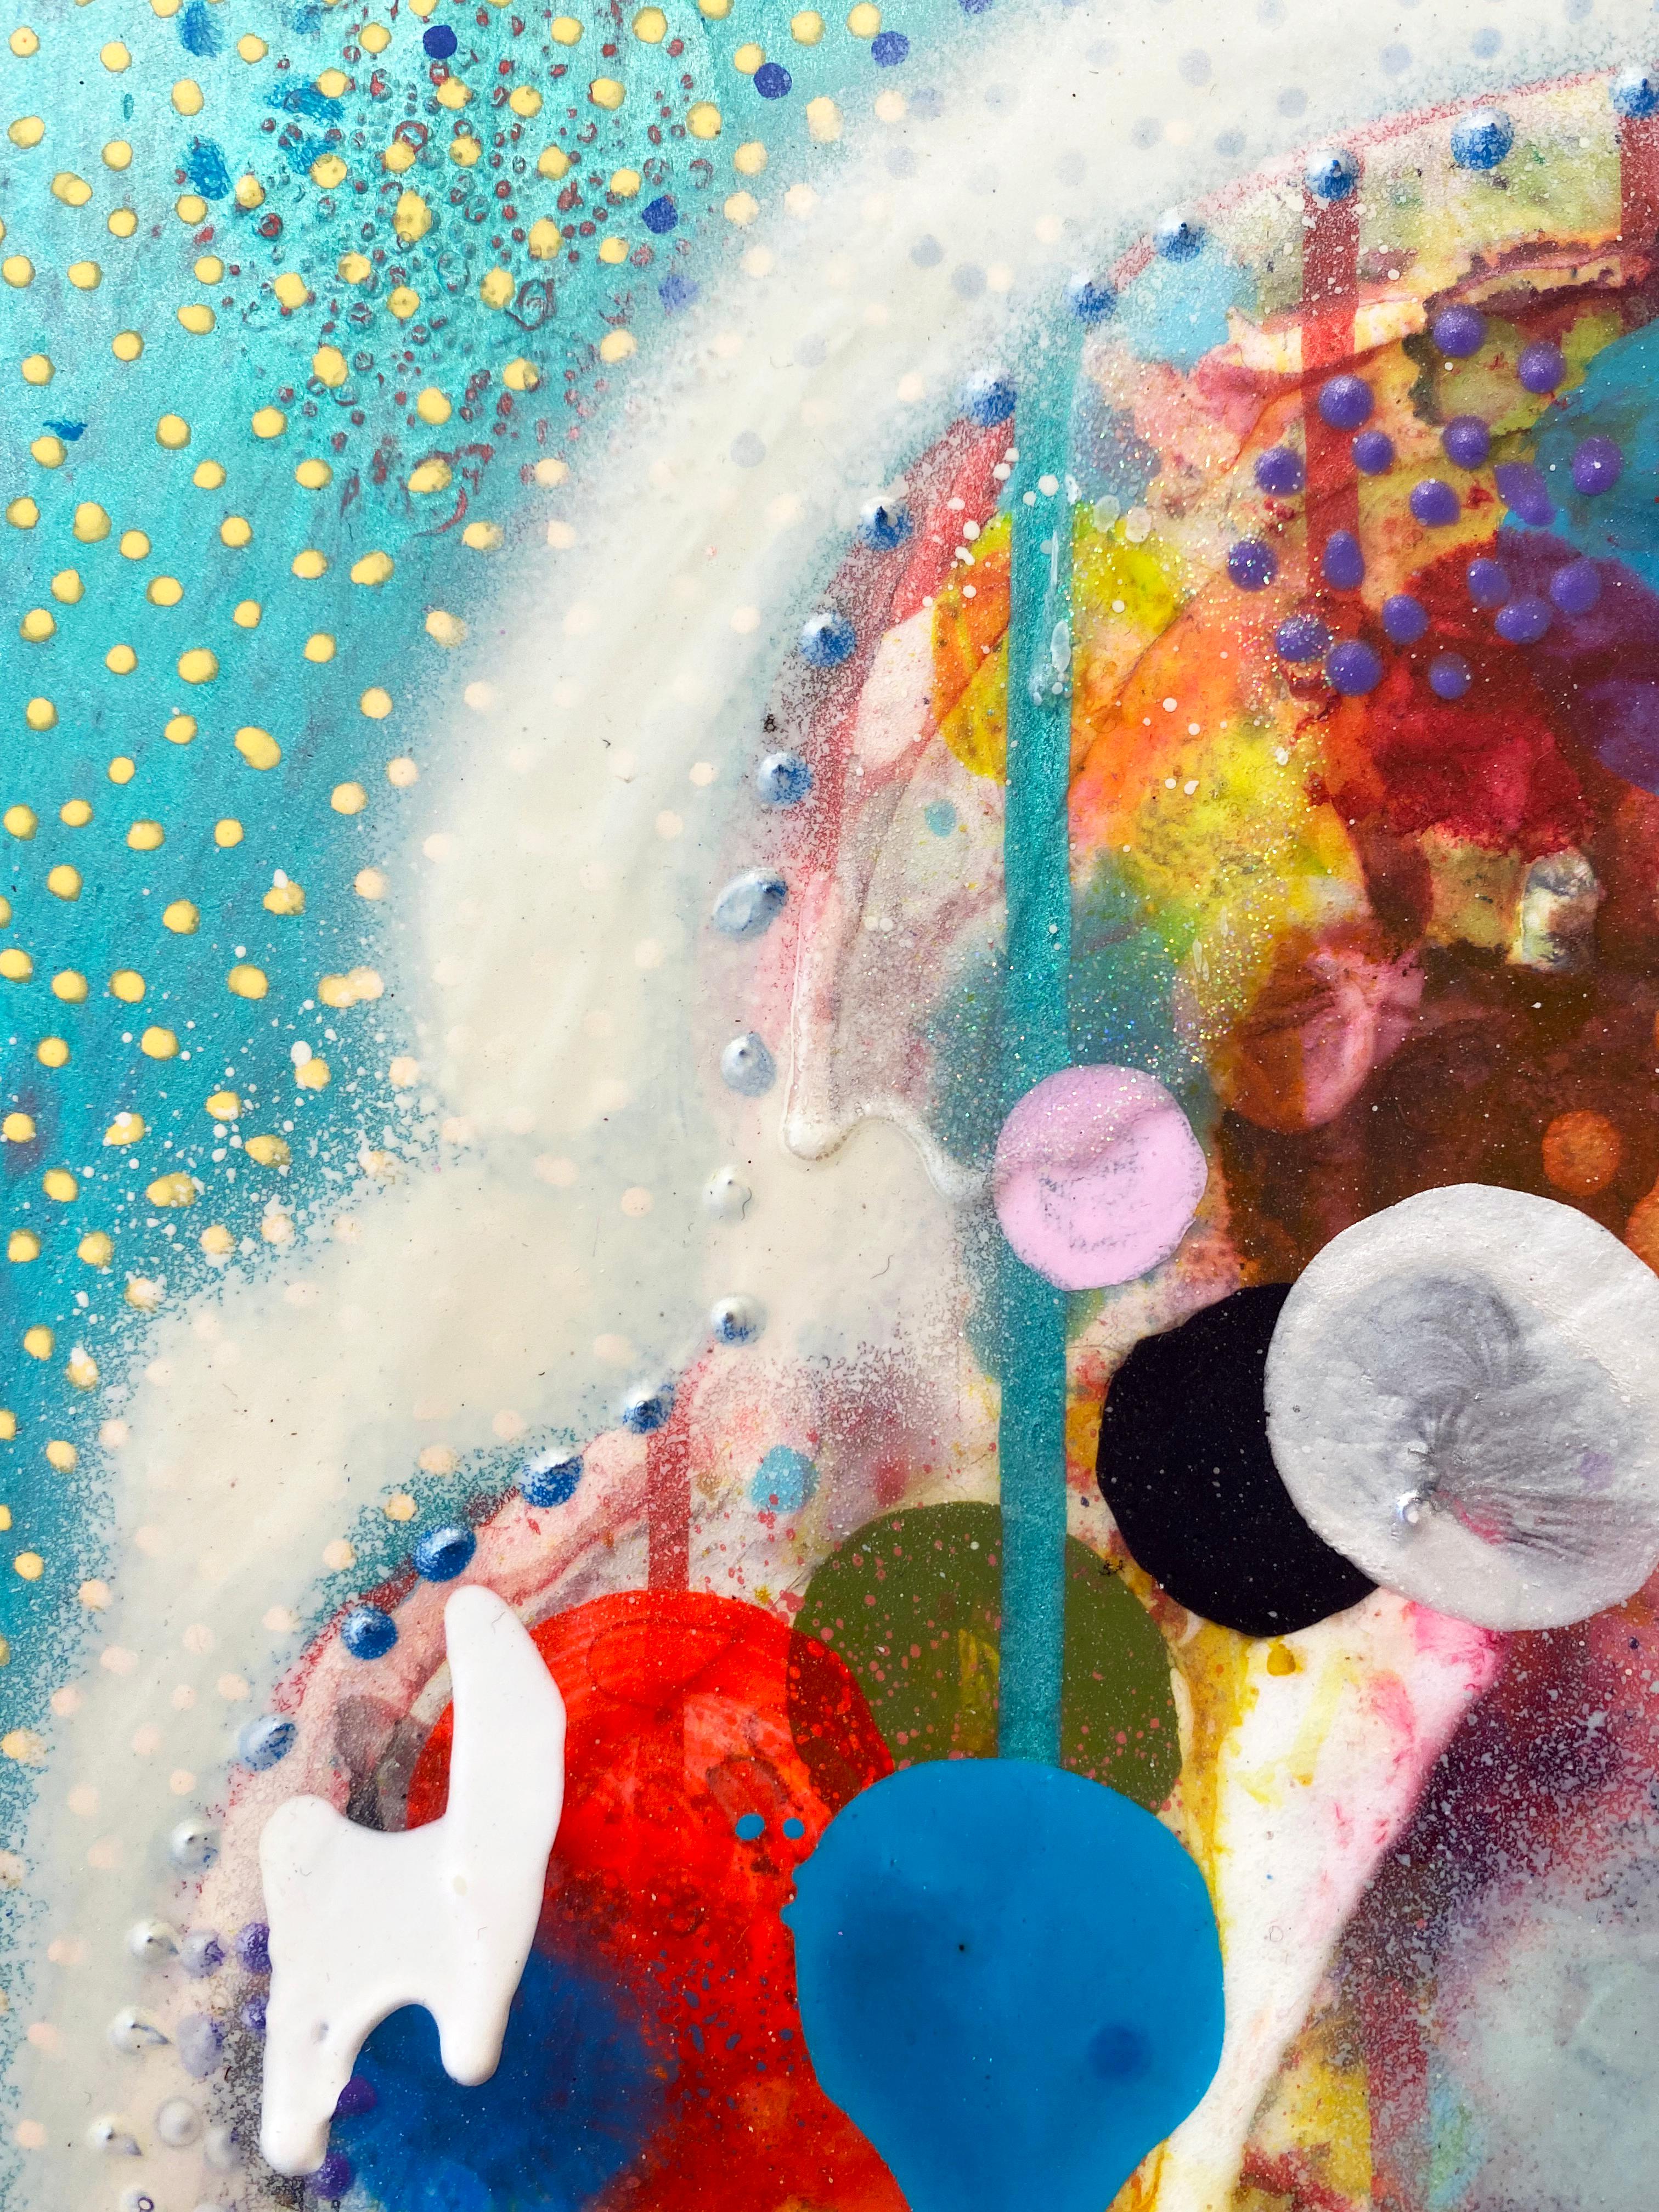 Abstract, Colorful Mixed Media Painting by Liz Tran 'Puff' For Sale 1